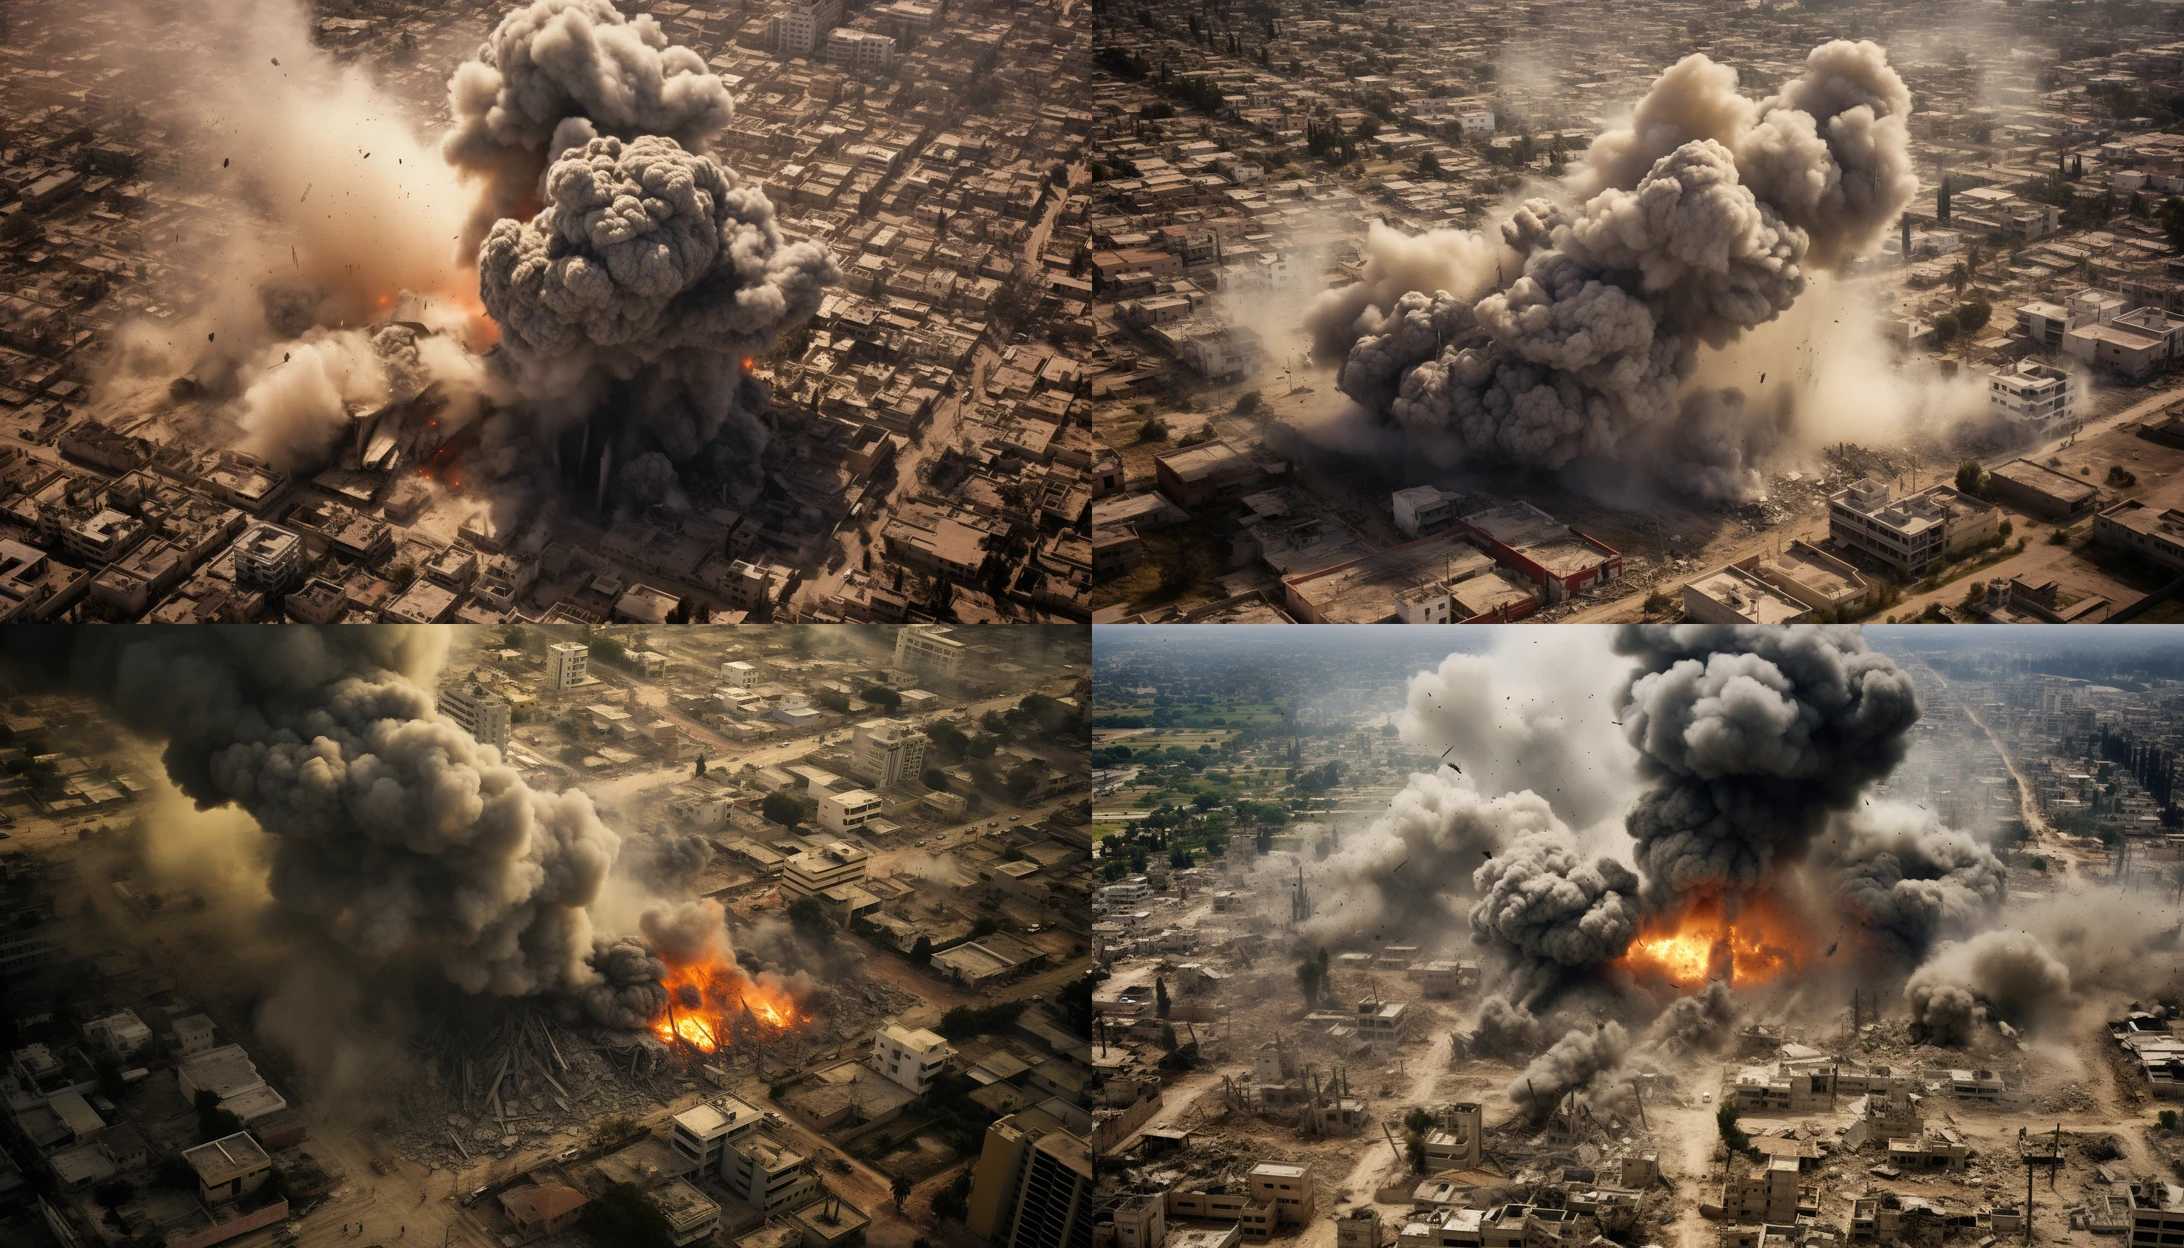 Aerial view of the conflict zone between Israel and Hamas, symbolizing the ongoing violence.